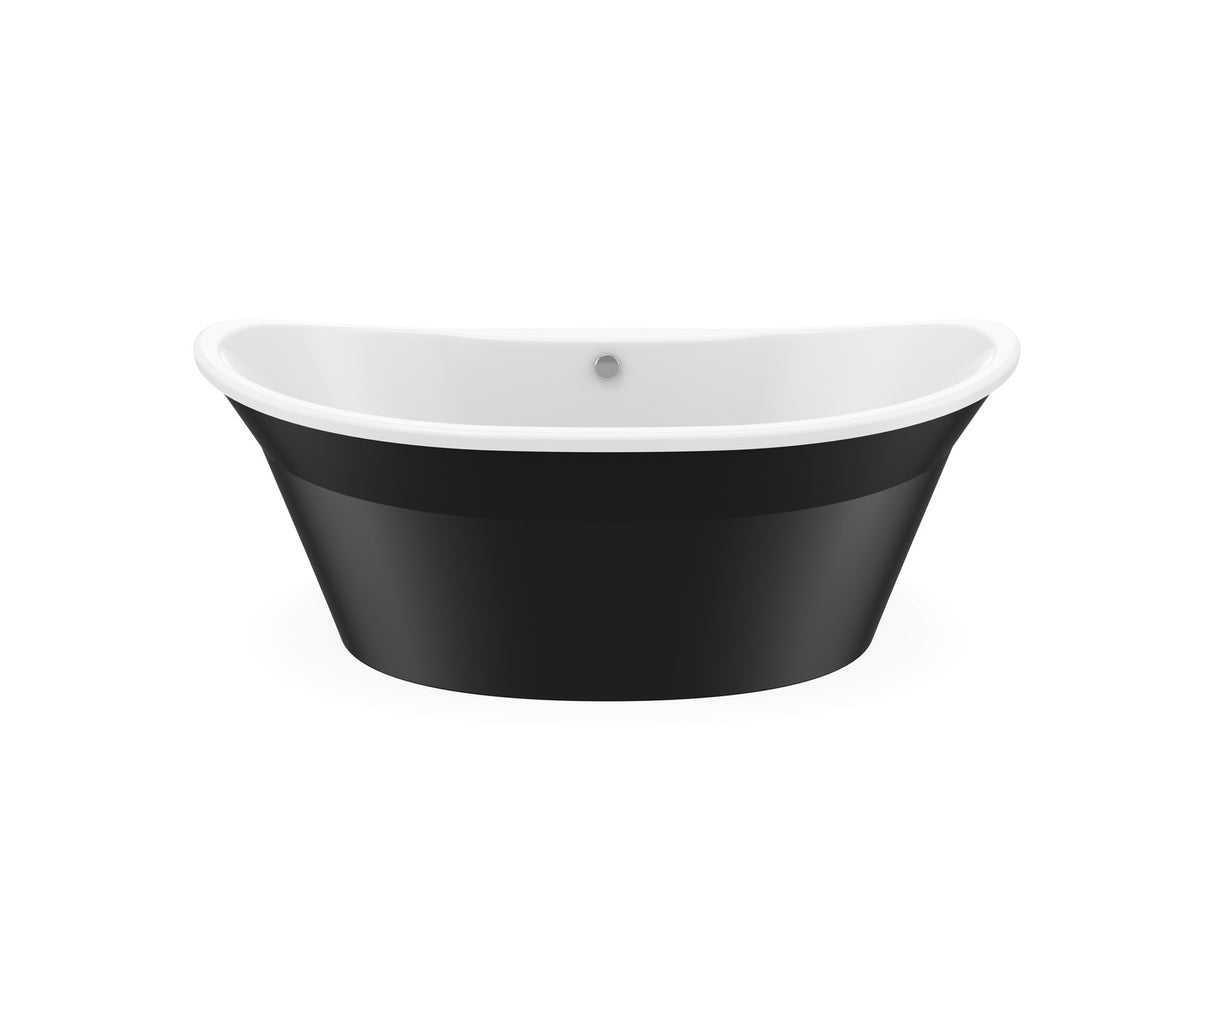 MAAX 106151-000-002-127 Orchestra 6636 AcrylX Freestanding Center Drain Bathtub in White with Black Skirt